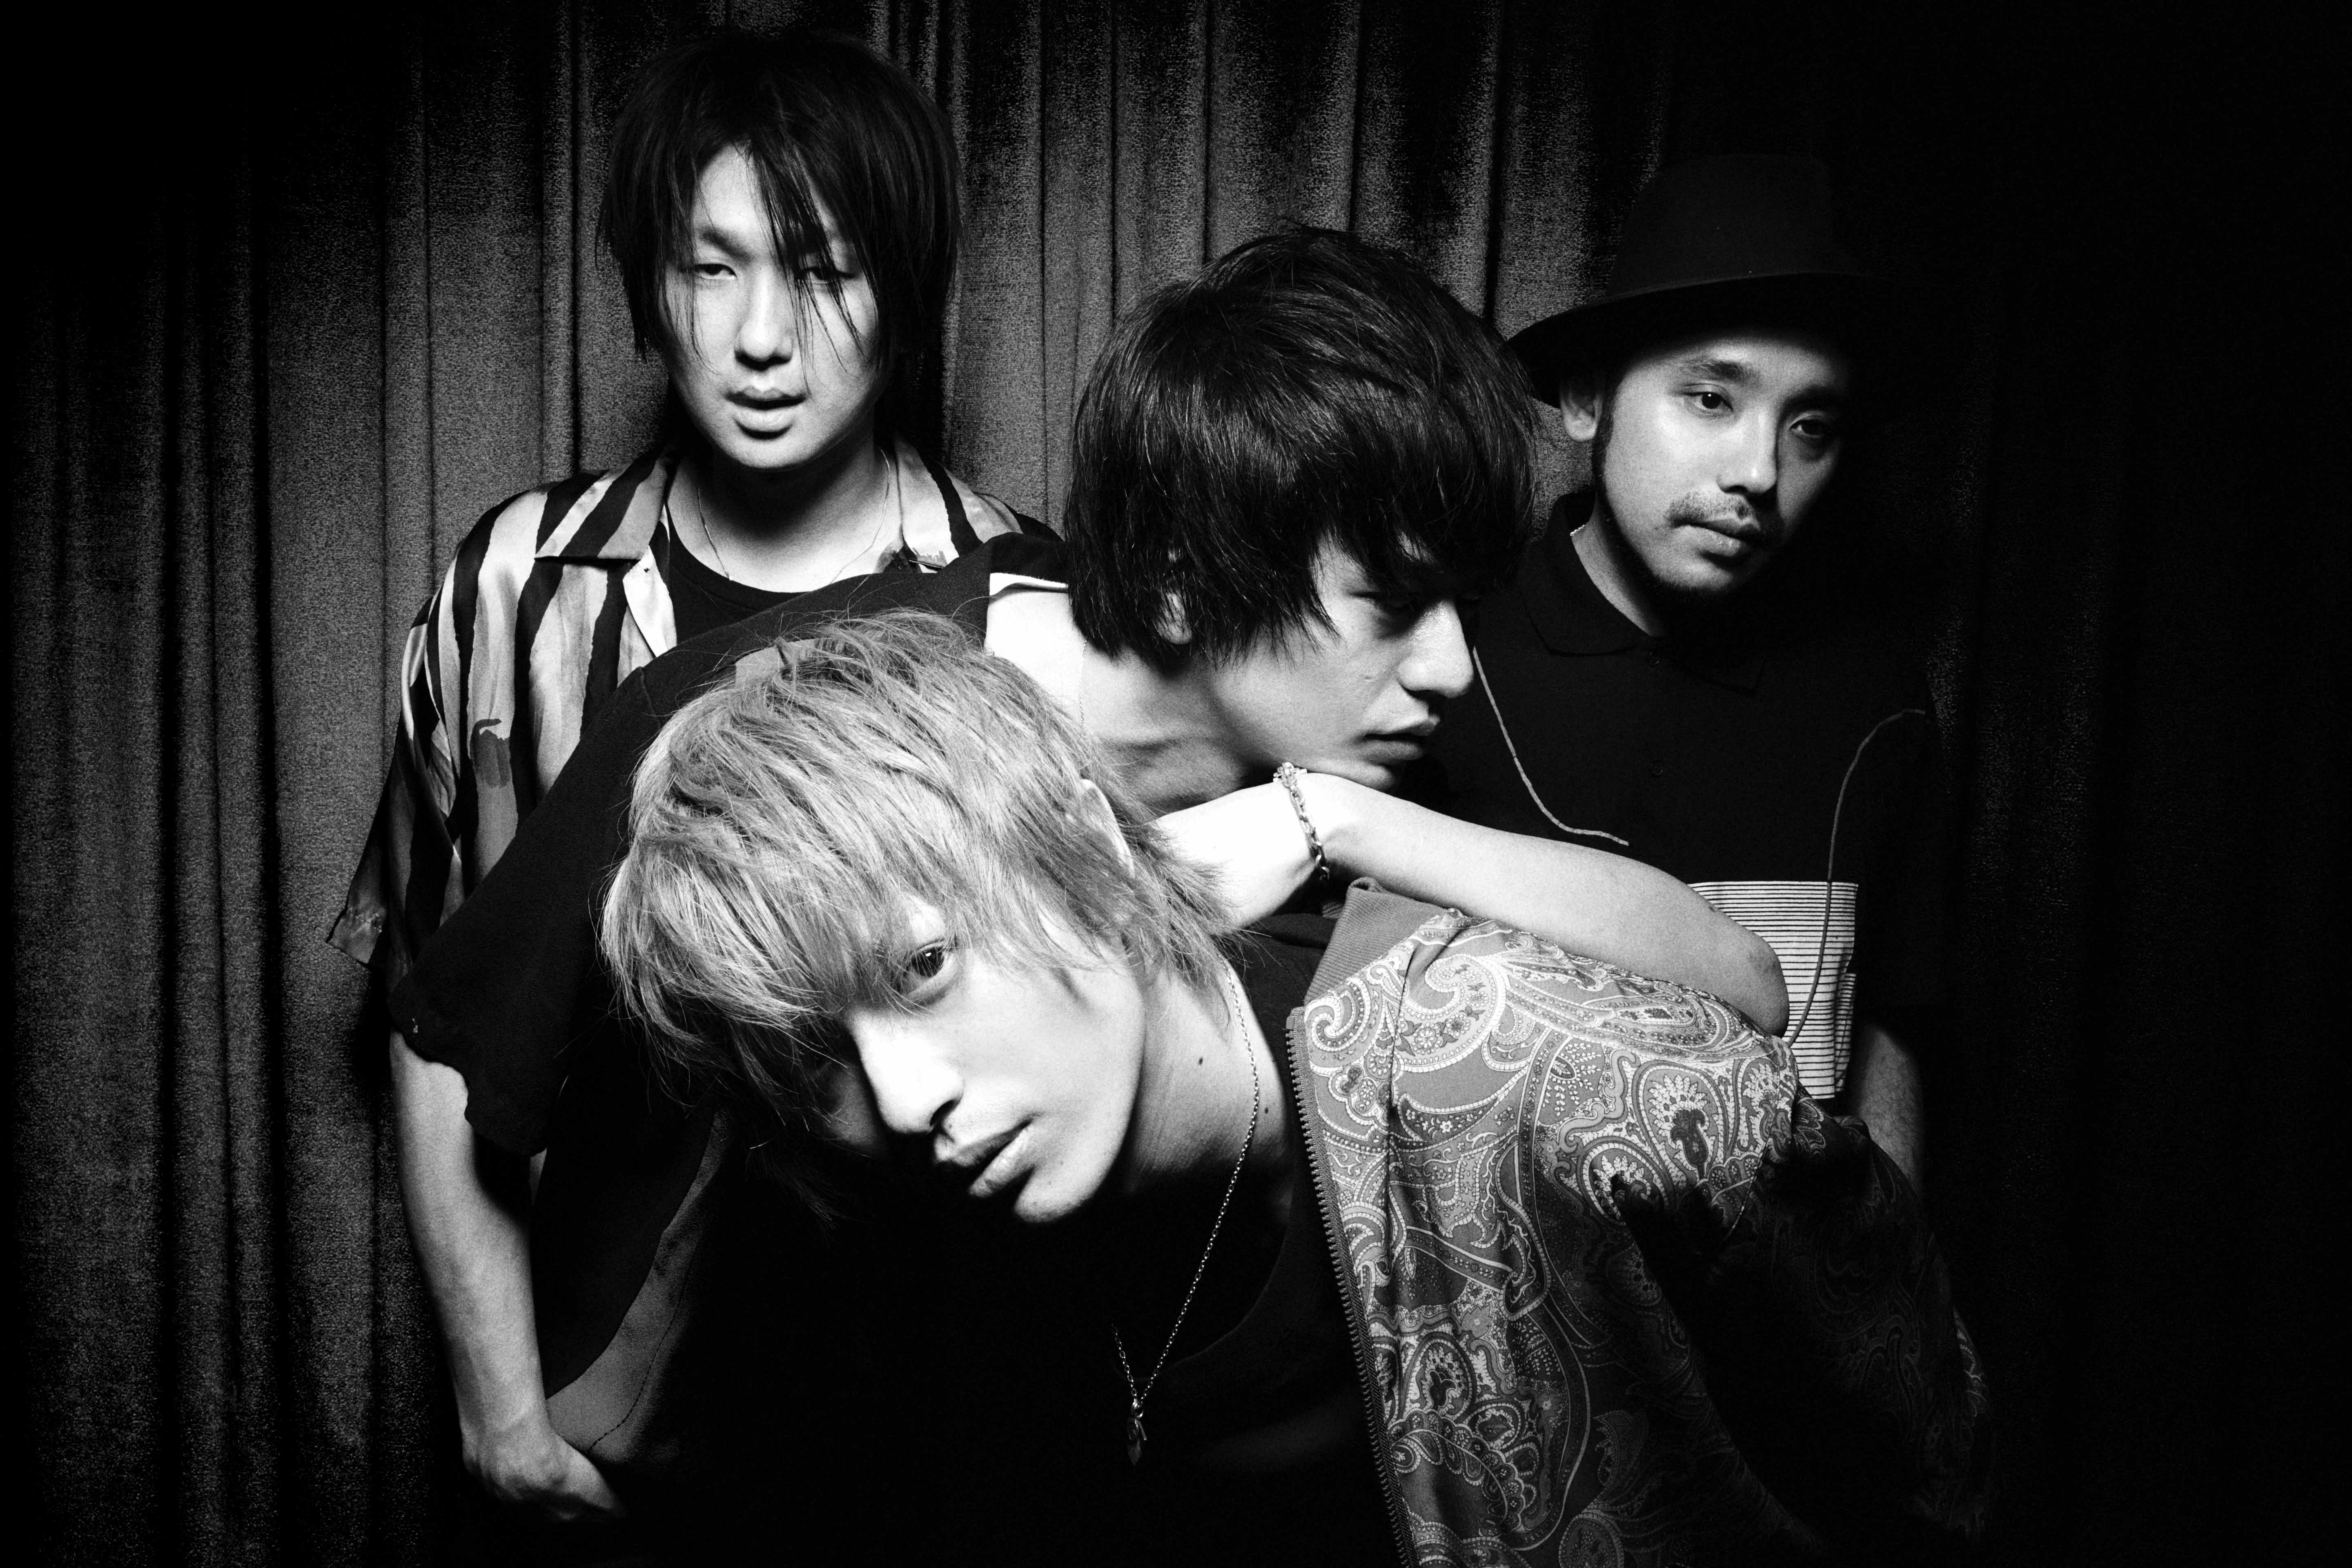 NICO Touches the Walls 1125の日史上初、全員参加企画が放送決定